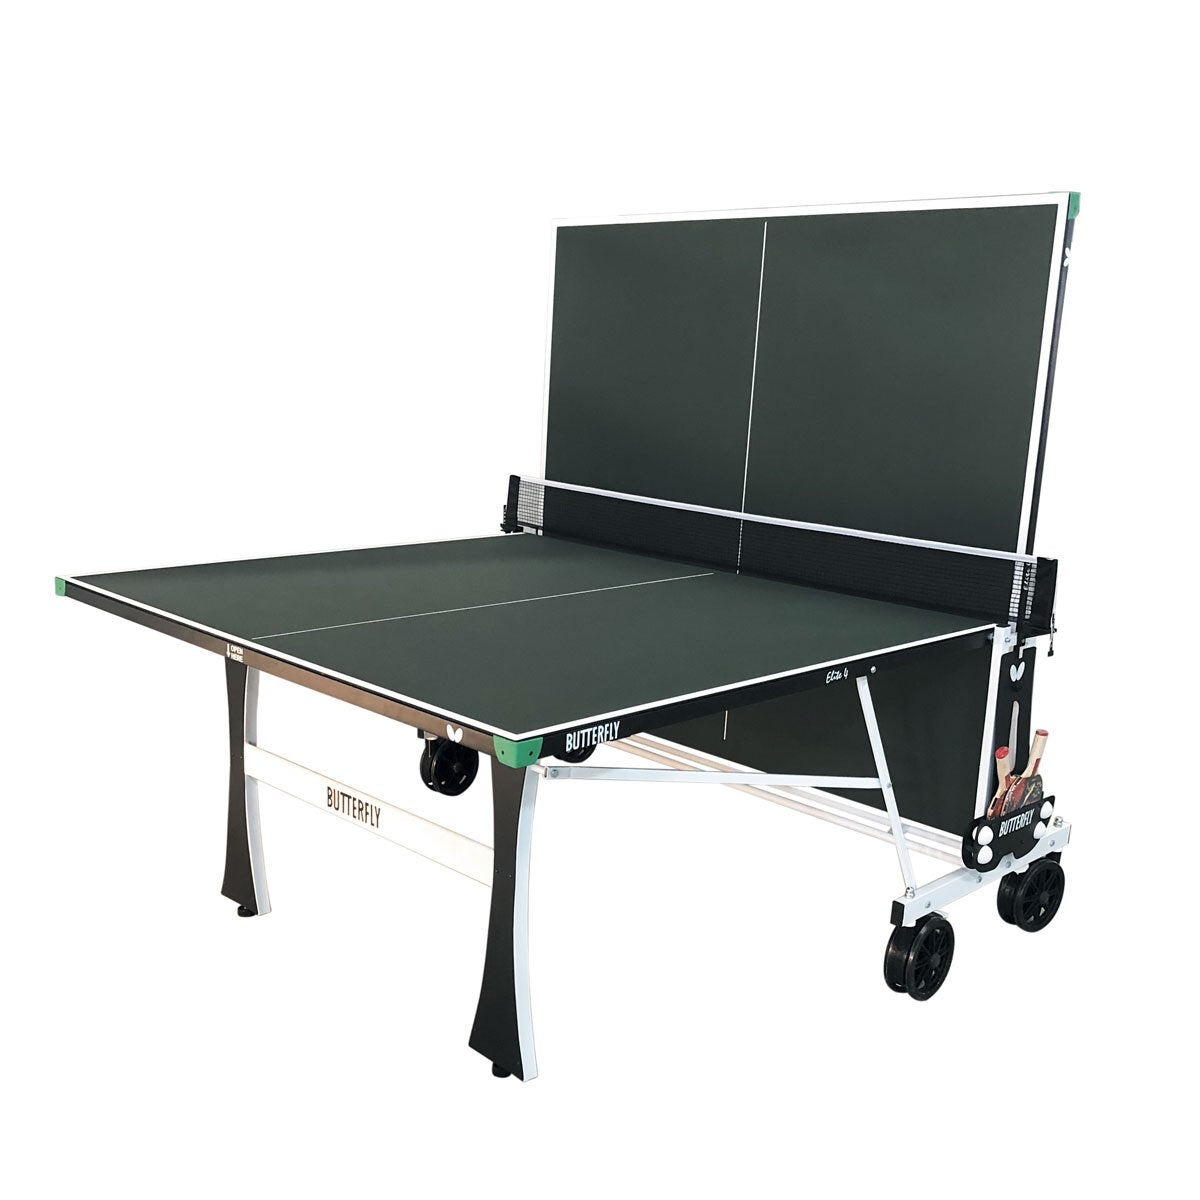 Butterfly Elite 4 Outdoor Table Tennis Table